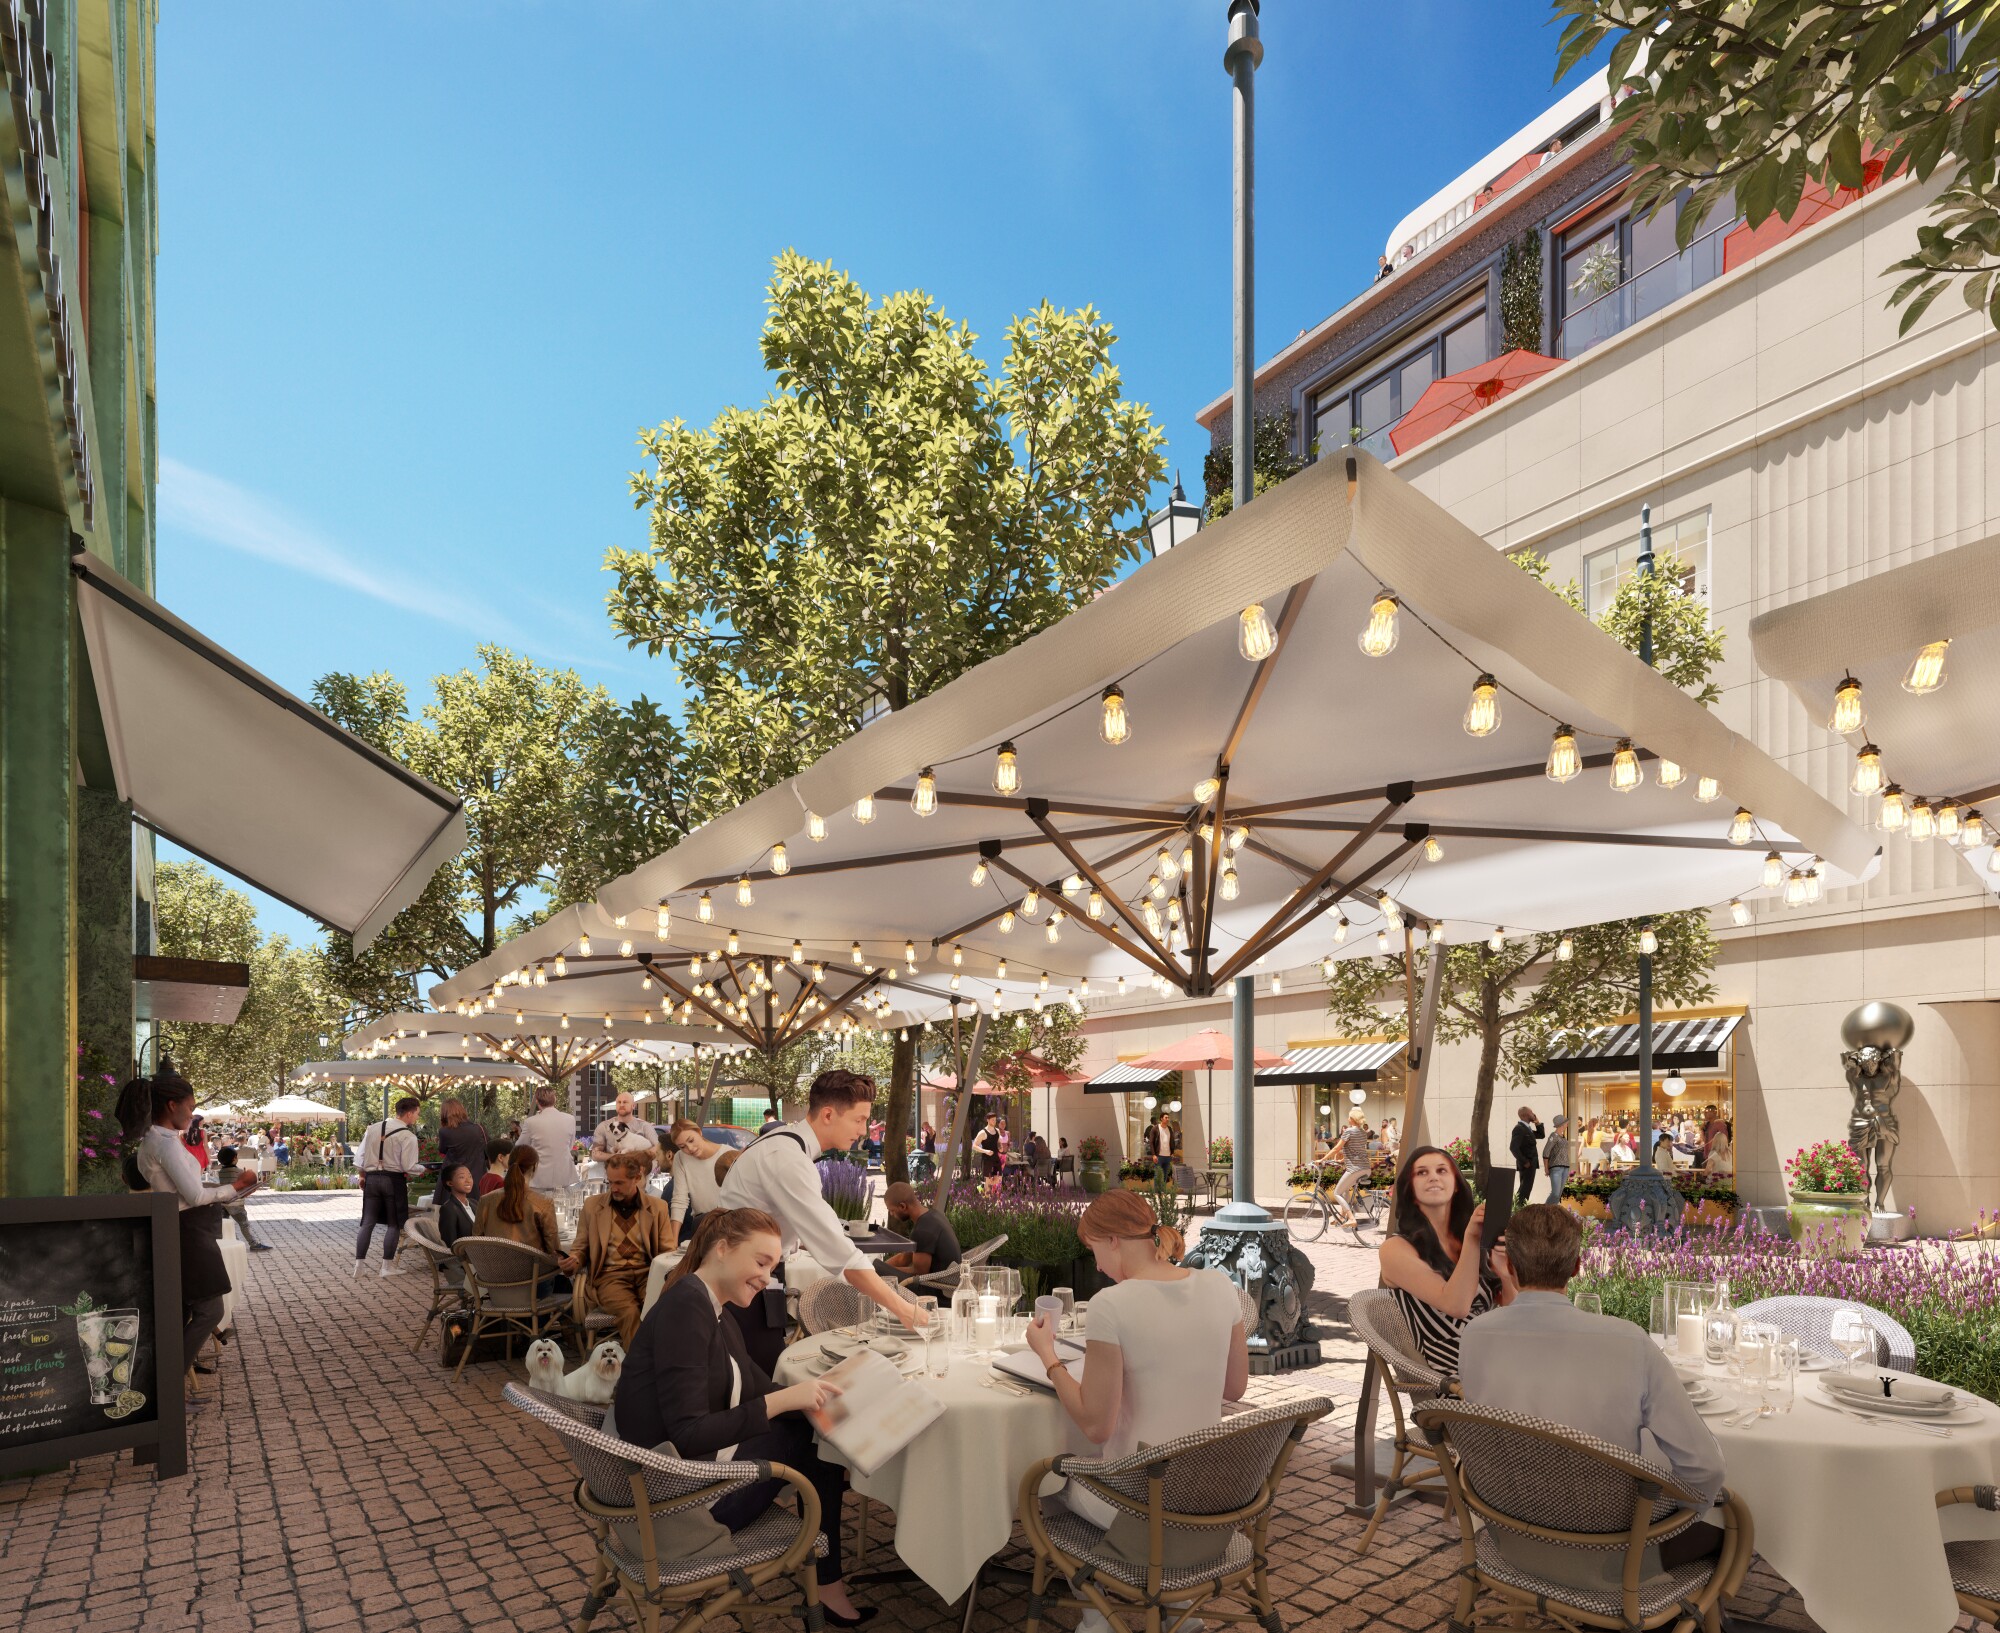 A render shows an alfresco dining at the Saks Fifth Avenue development.